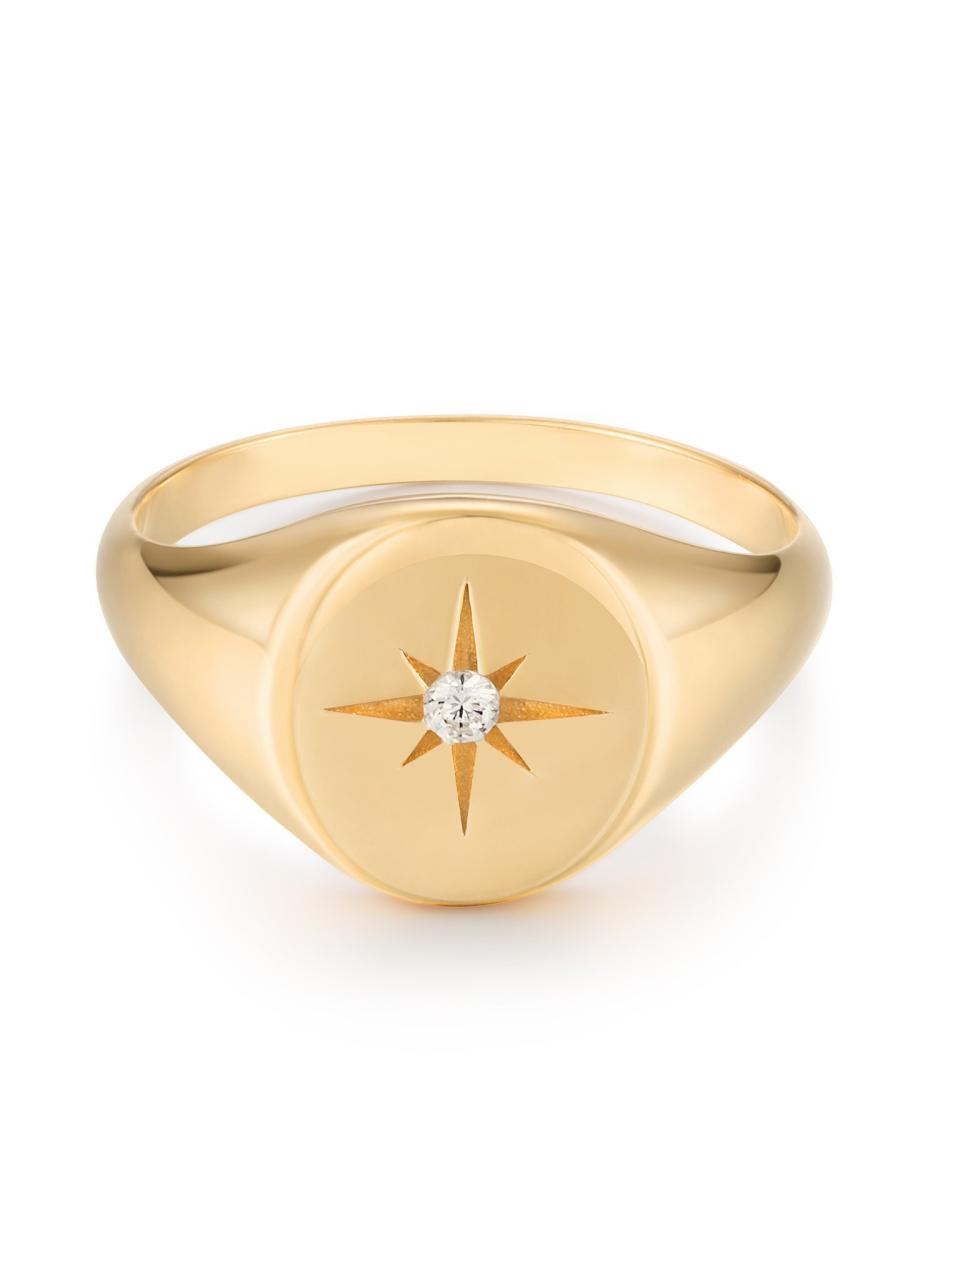 Get the <a href="https://shoppoirier.com/collections/rings/products/starburst-signet" target="_blank" rel="noopener noreferrer">Poirier starburst signet, available in sizes 7-13, for $65</a>